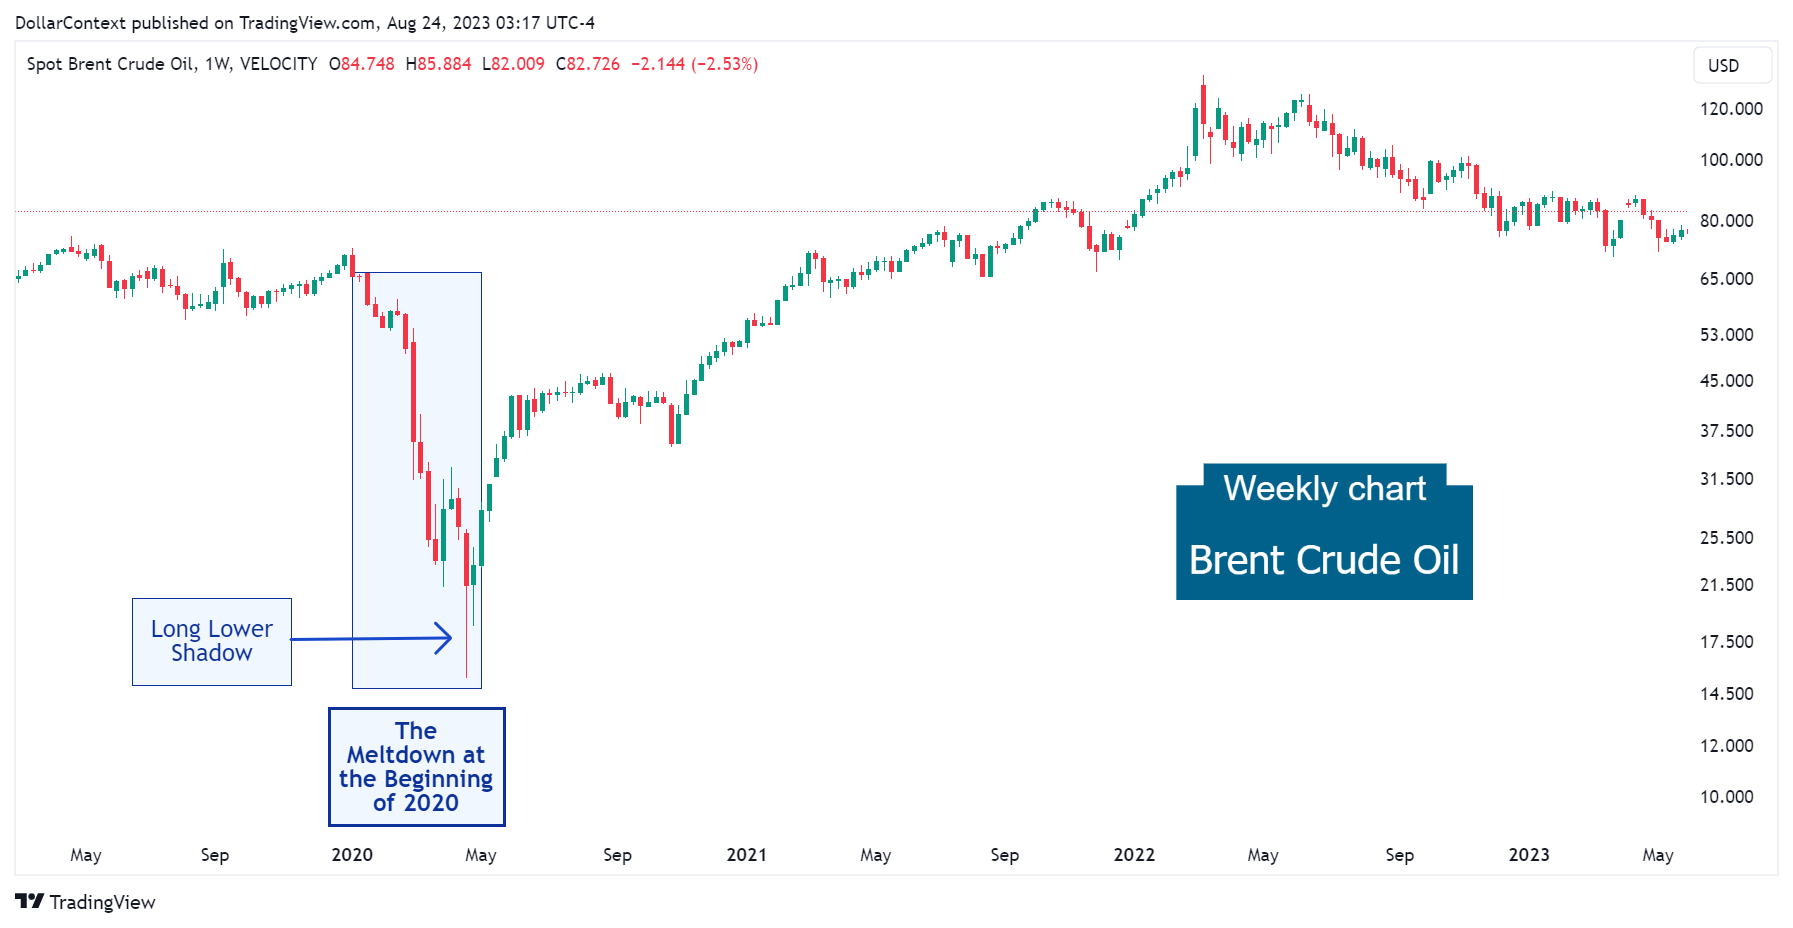 Brent Crude Oil: Early 2020 Collapse (Weekly Chart)